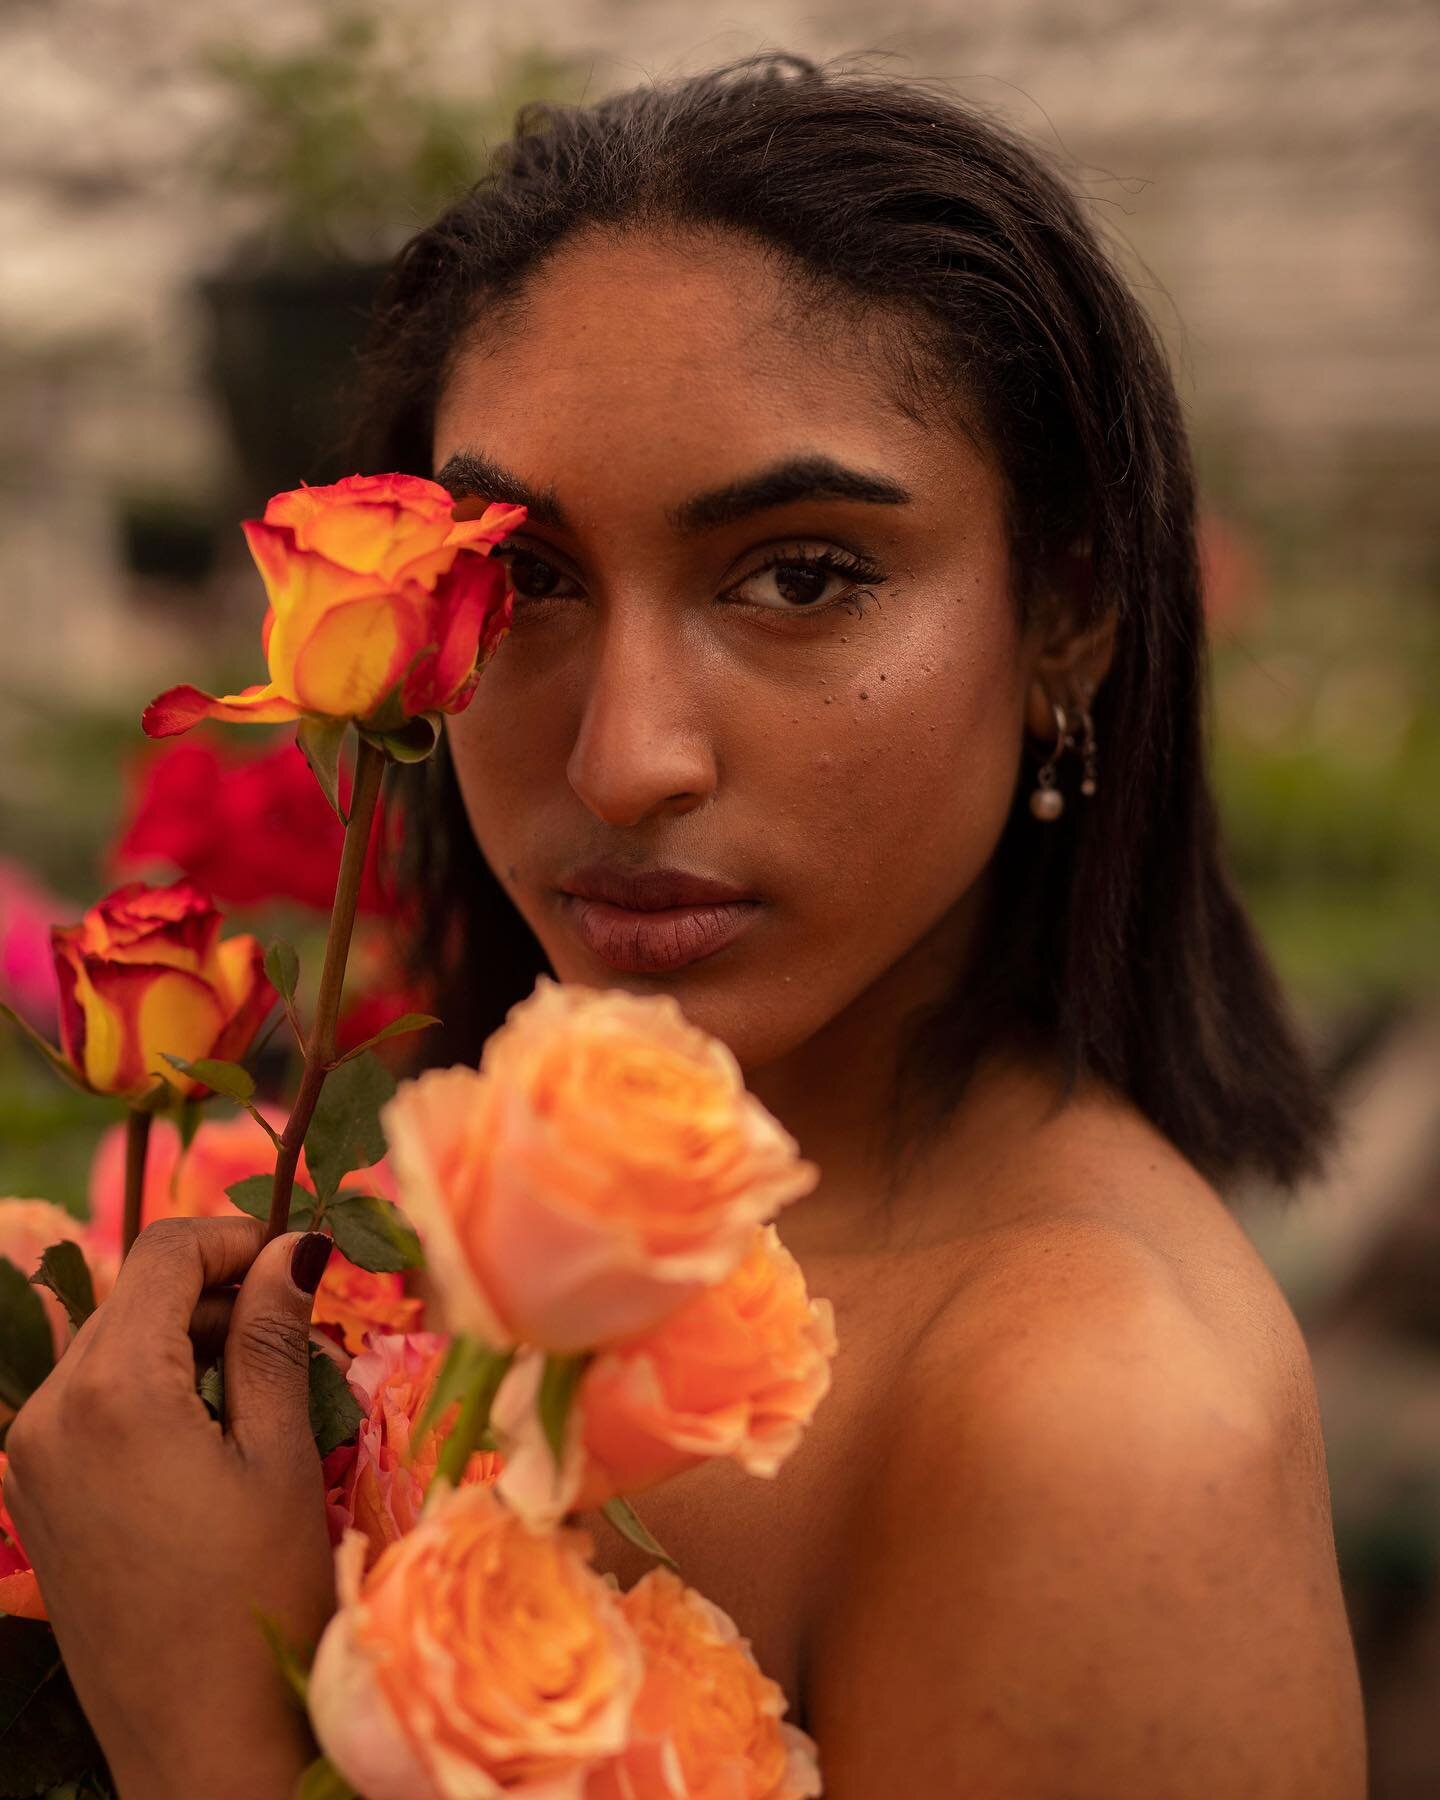 In full bloom 🌷🌼
.
.
.
.
.
.
.
.
.
.
.
.
.
.
.
#greenhouse #greenhousephotoshoot #greenhouseportraits #greenhousephotoshoot #greenhousephotography #flowerphotography #springportraits #buckscounty #phillymodel #phillyinfluencer #phillyphotographer #